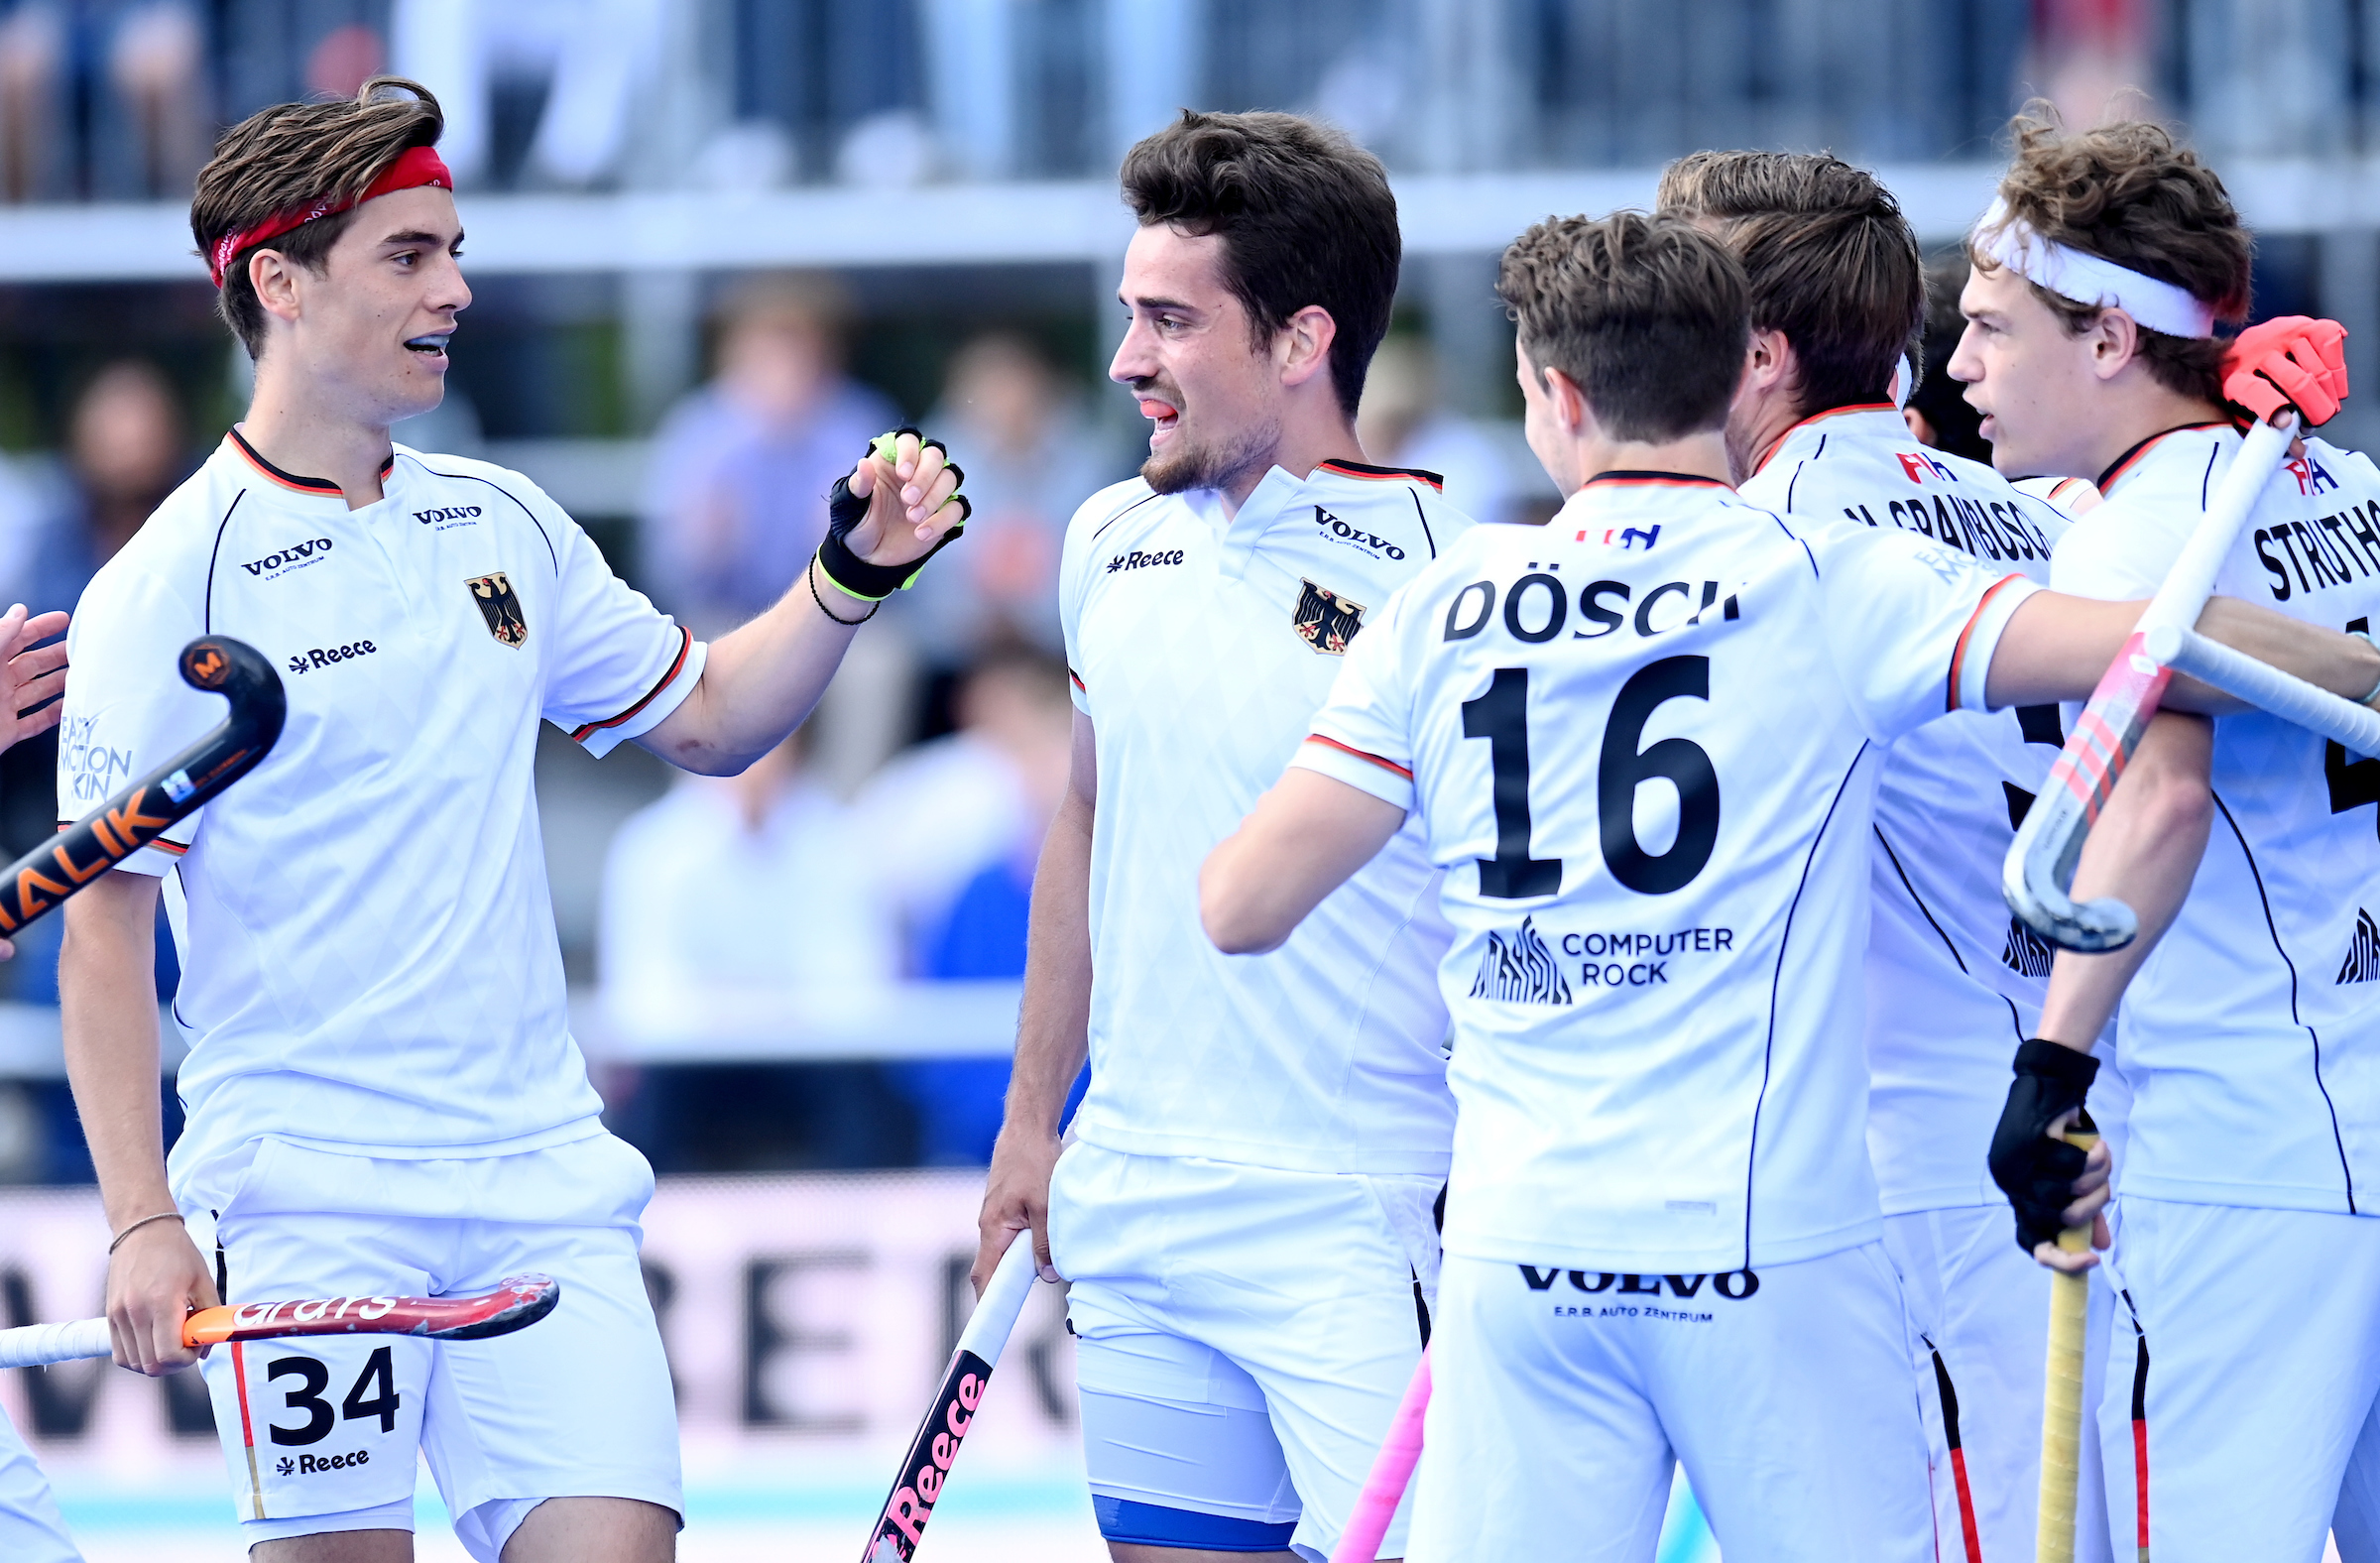 WSP22052217251 - Pro-League: Honamas Win Spectacle Against Argentina - What the Danas hadn't been able to do before, the Honamas showed in the first of two FIH Pro League games on the Ernst-Reuter-Sportfeld (Berlin) against Argentina. Coach André Henning's team won spectacularly and deserved a 6-3 victory over the South Americans. The goals for the Honamas were scored by Tom Grambusch with a penalty, Raphael Hartkopf after a penalty corner, Thies Prinz twice and Gonzalo Peillat twice after penalty corners. Nicolas Keenan, Thomas Habif and Santiago Tarazona scored for the Argentines.